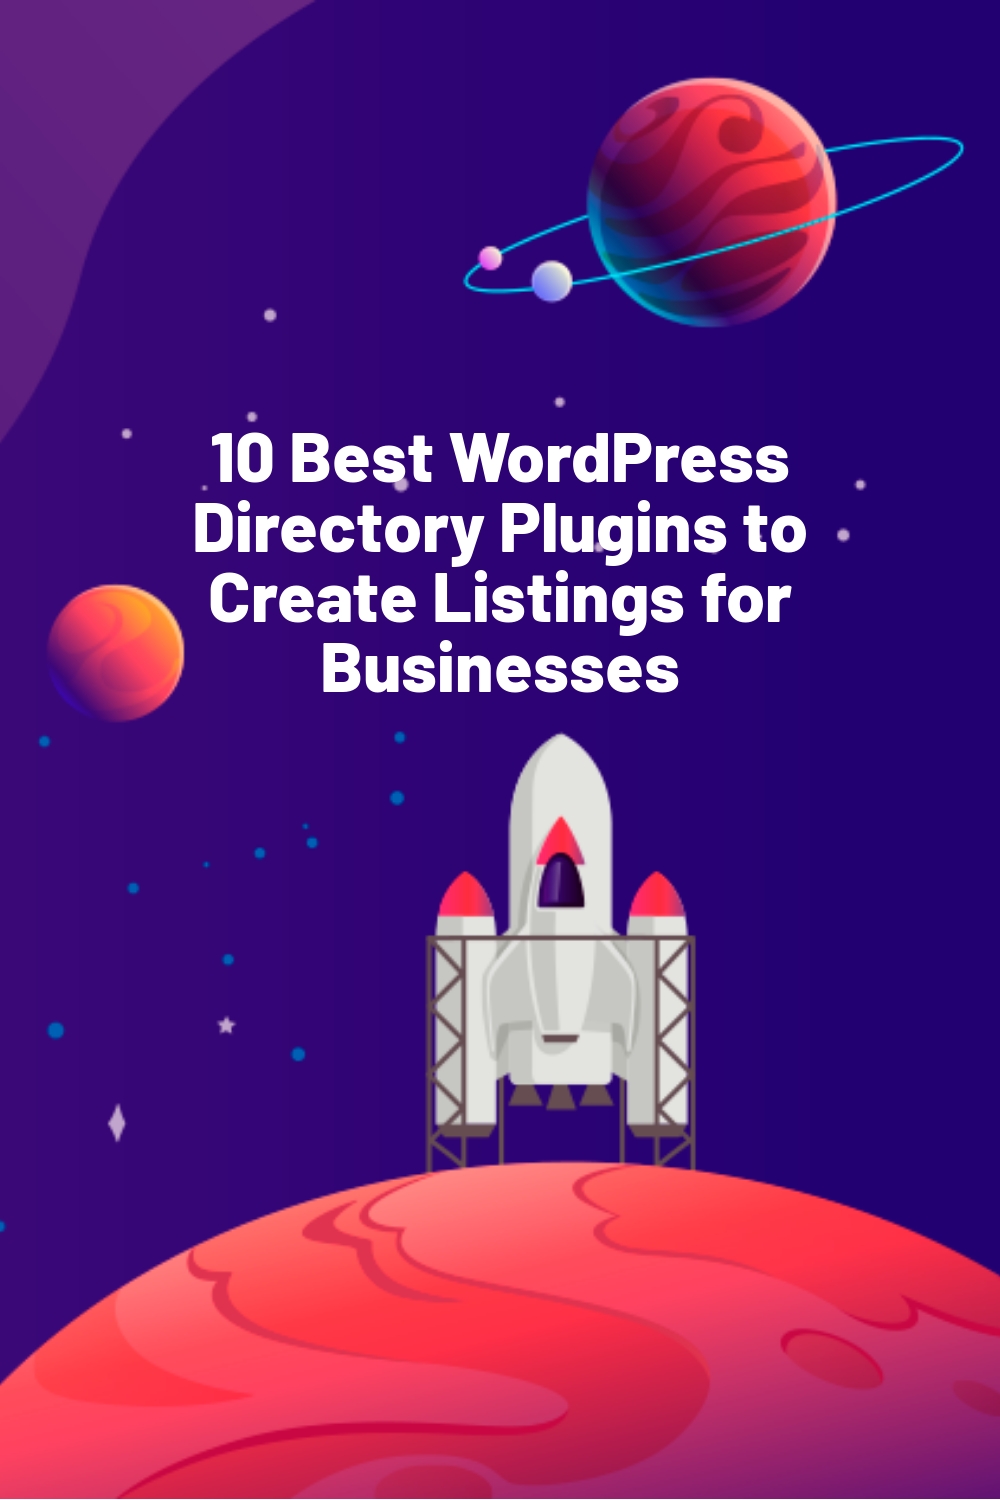 10 Best WordPress Directory Plugins to Create Listings for Businesses